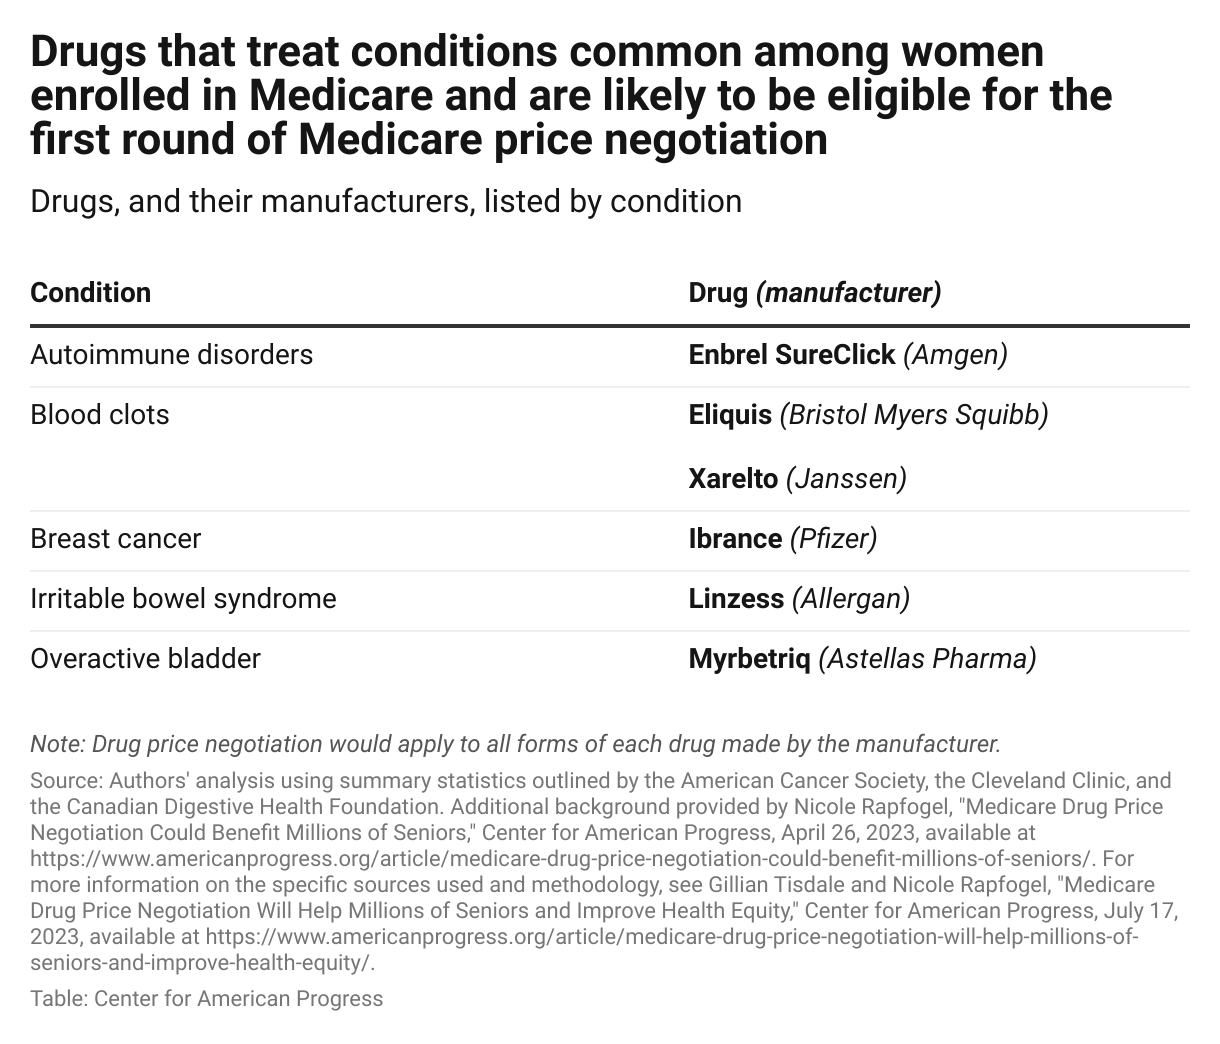 List of drugs likely to be eligible for Medicare price negotiation that treat conditions common among enrolled women, including autoimmune disorders, blood clots, breast cancer, irritable bowel syndrome, and overactive bladder.